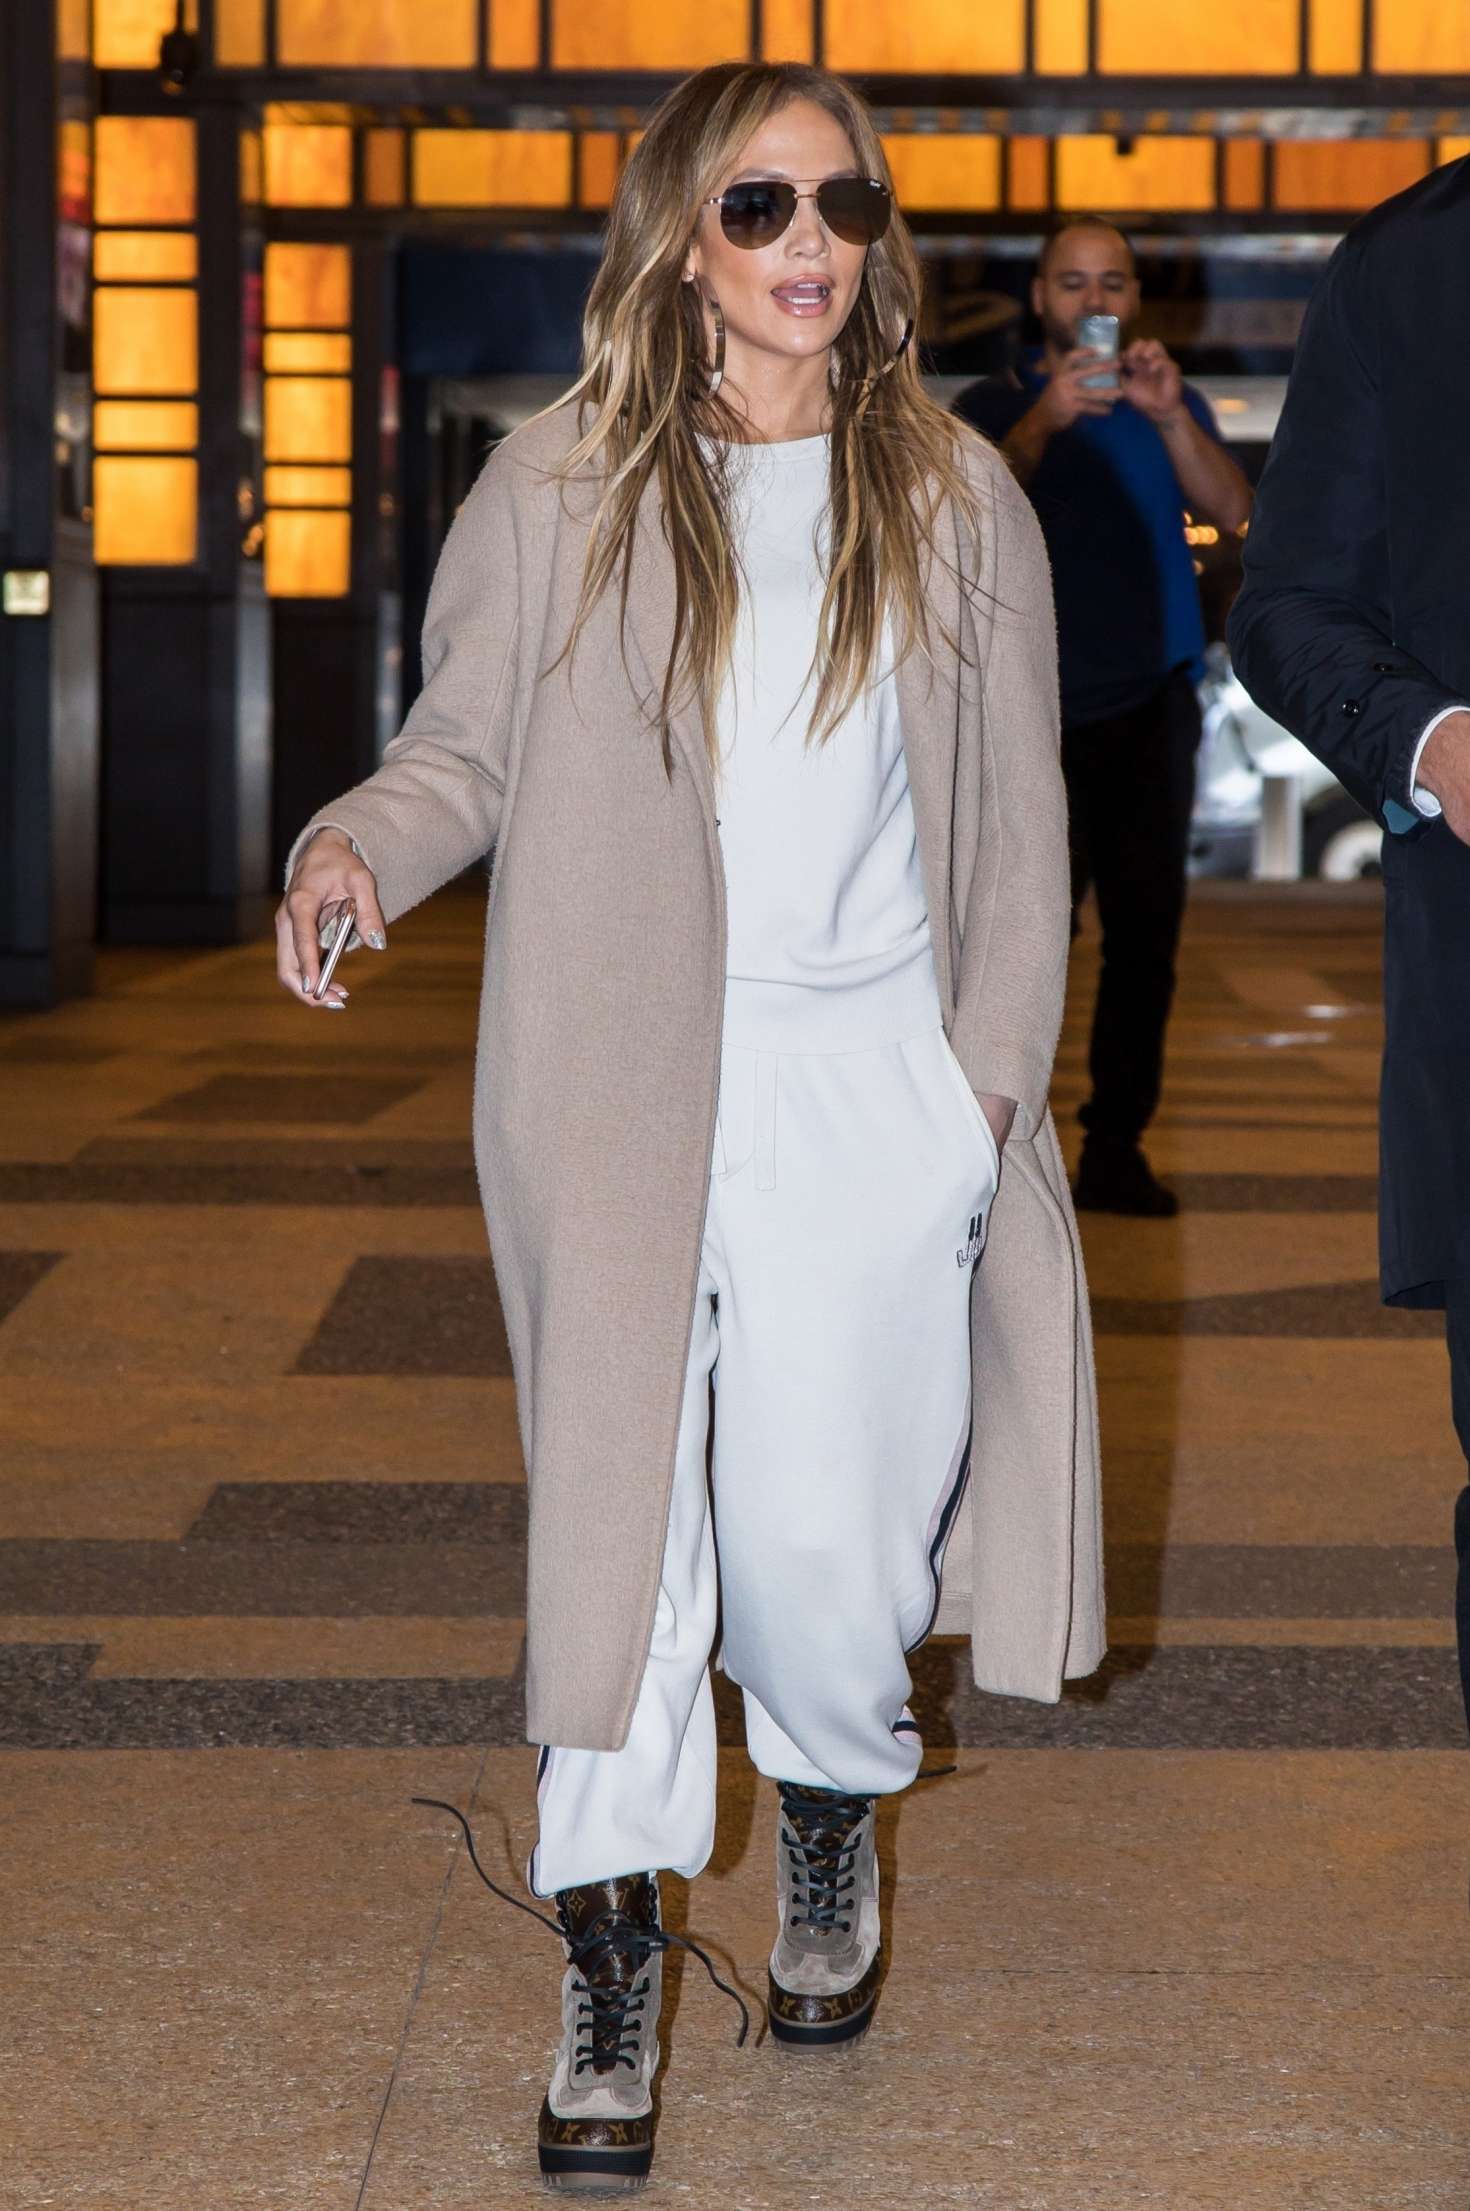 Jennifer Lopez â€“ Leaving the NBCUniversal Upfront Presentation in NYC